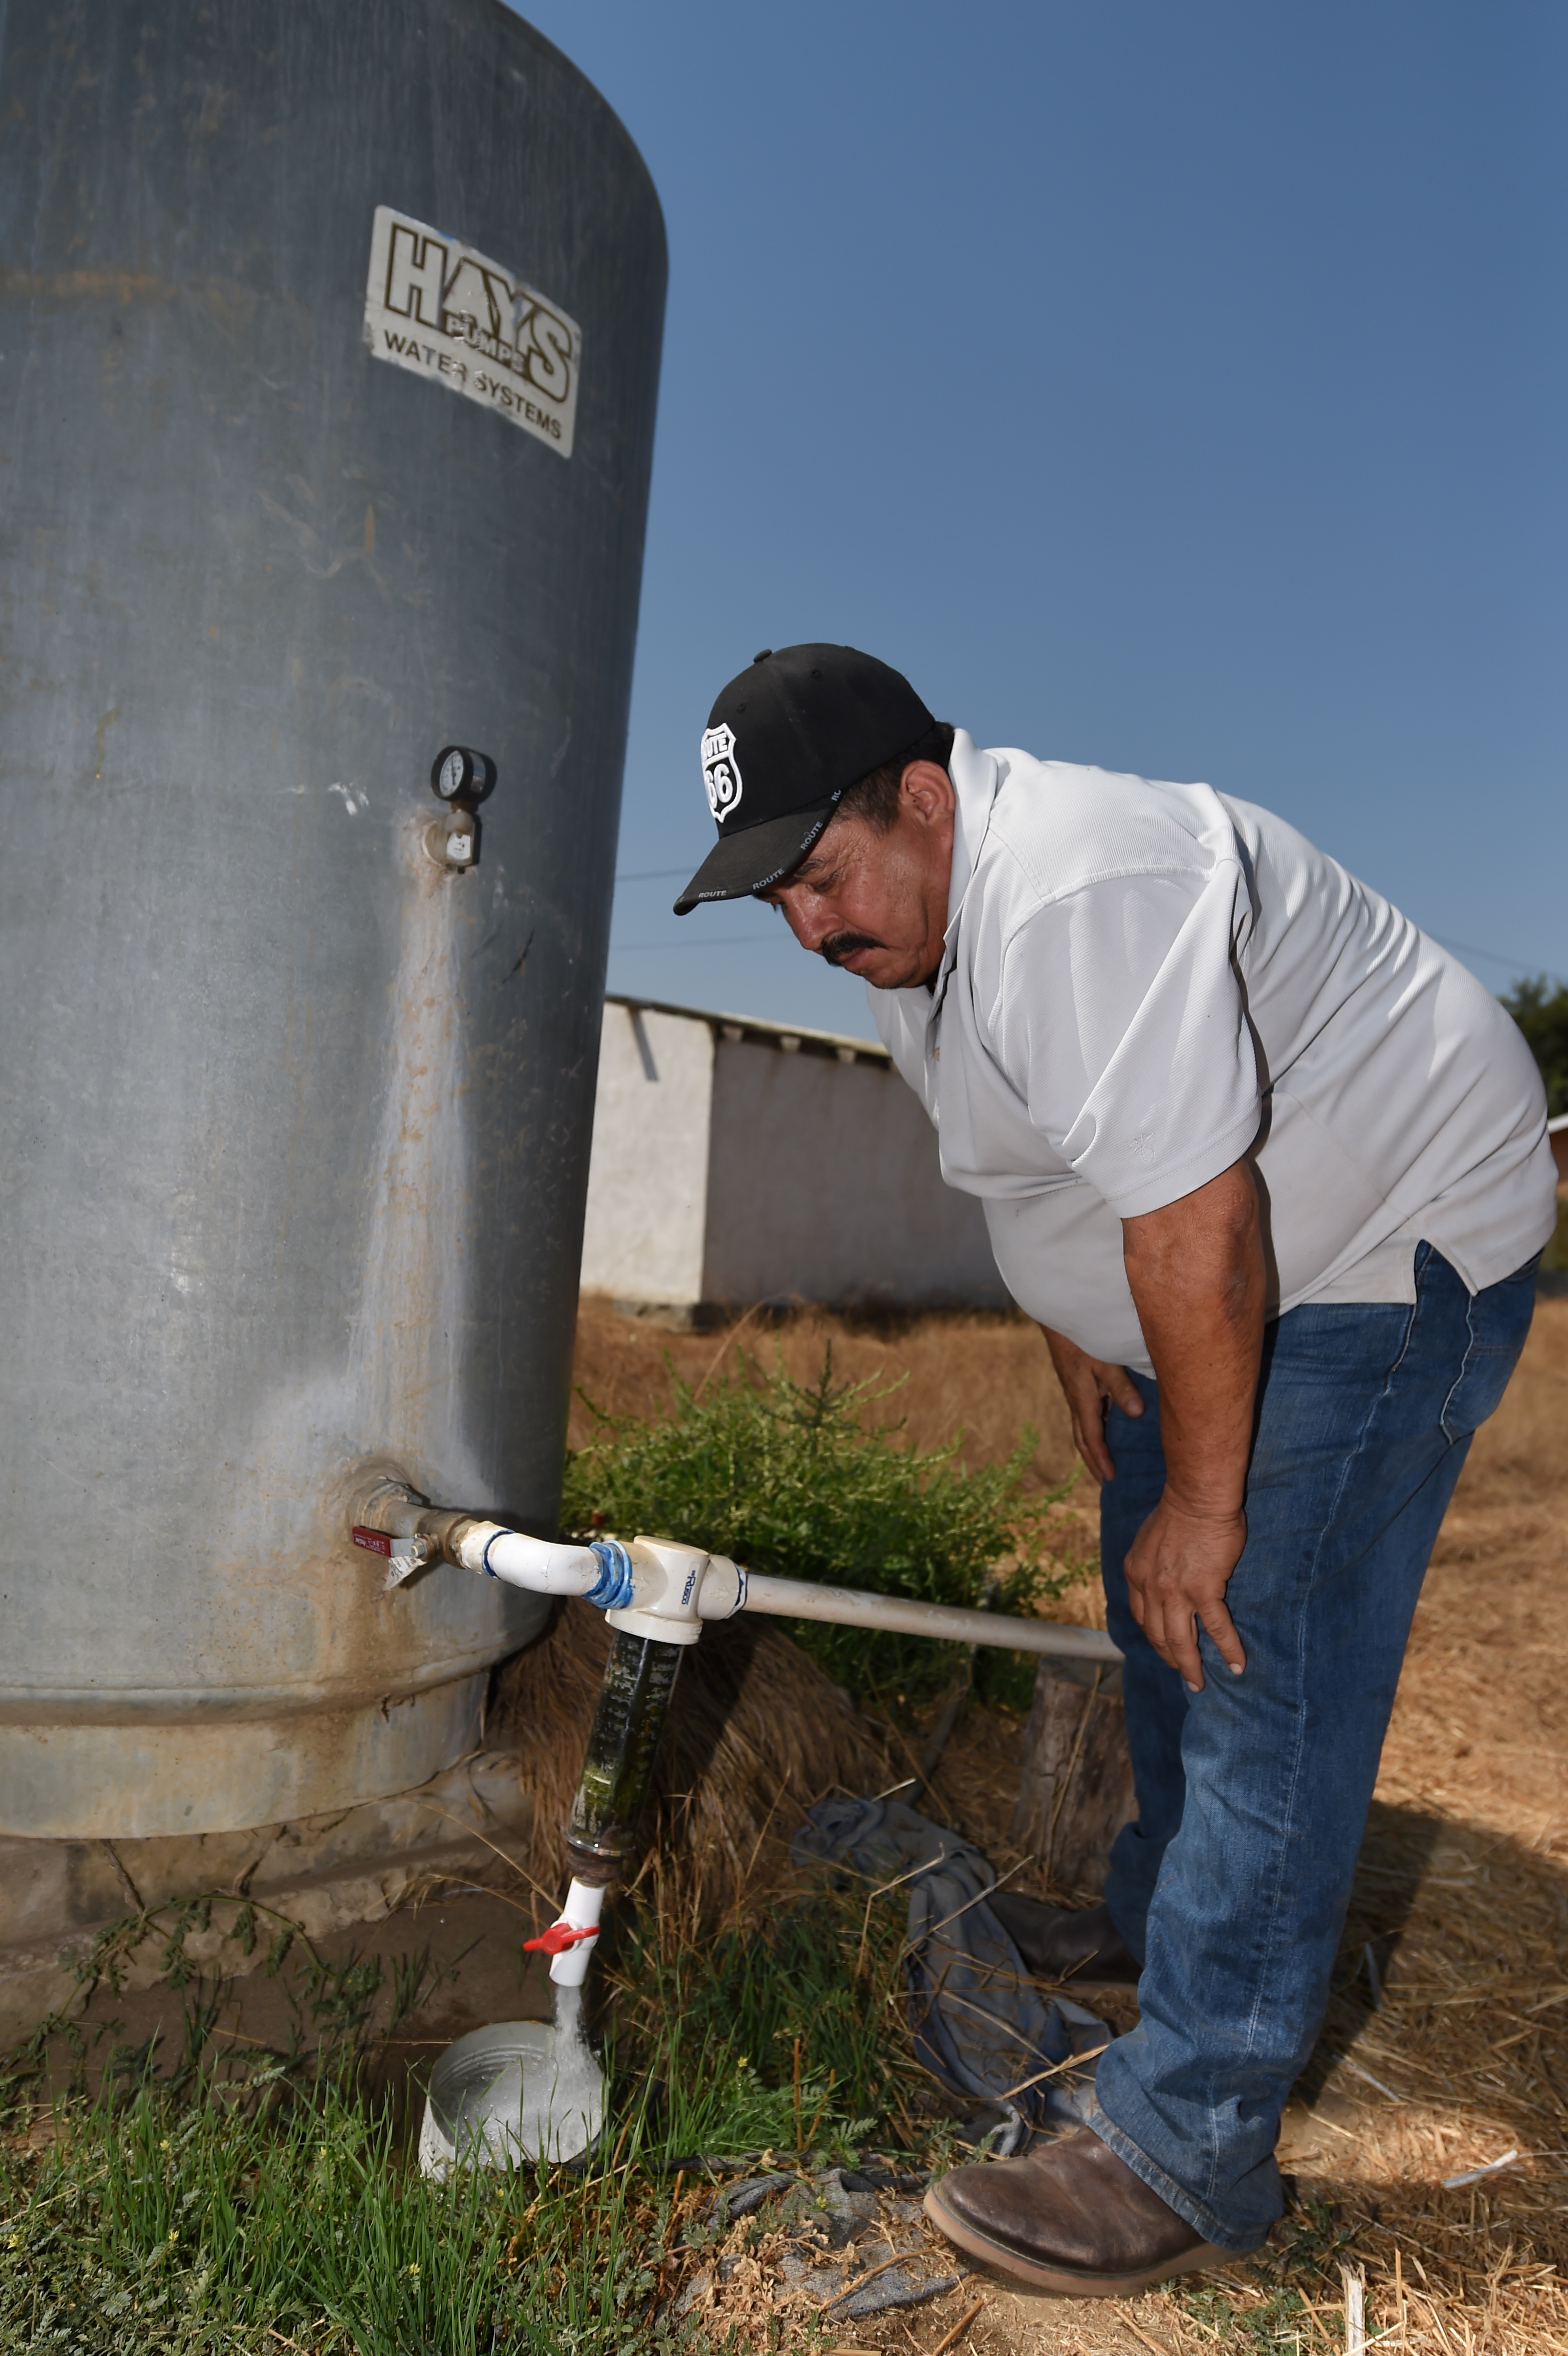 Cristobal Chavez turns on the table on his family's water well at his home, August 24, 2016 in Porterville in California's Central Valley. For many years Chavez, wife and children drank the well water but recently discovered the water is contamined with three times the legal limit of nitrates making it too dangerous to drink. Chavez' home is surrounded by dairy fields, where large dairy operations use cow manure to irrigate their feed crops. Manure as well as agricultural fertilizer is believed to be responsible for the exceptionally high level of nitrate which makes well water undrinkable in many areas of this farming community about 160 miles north of Los Angeles.  / AFP PHOTO / Robyn BECK